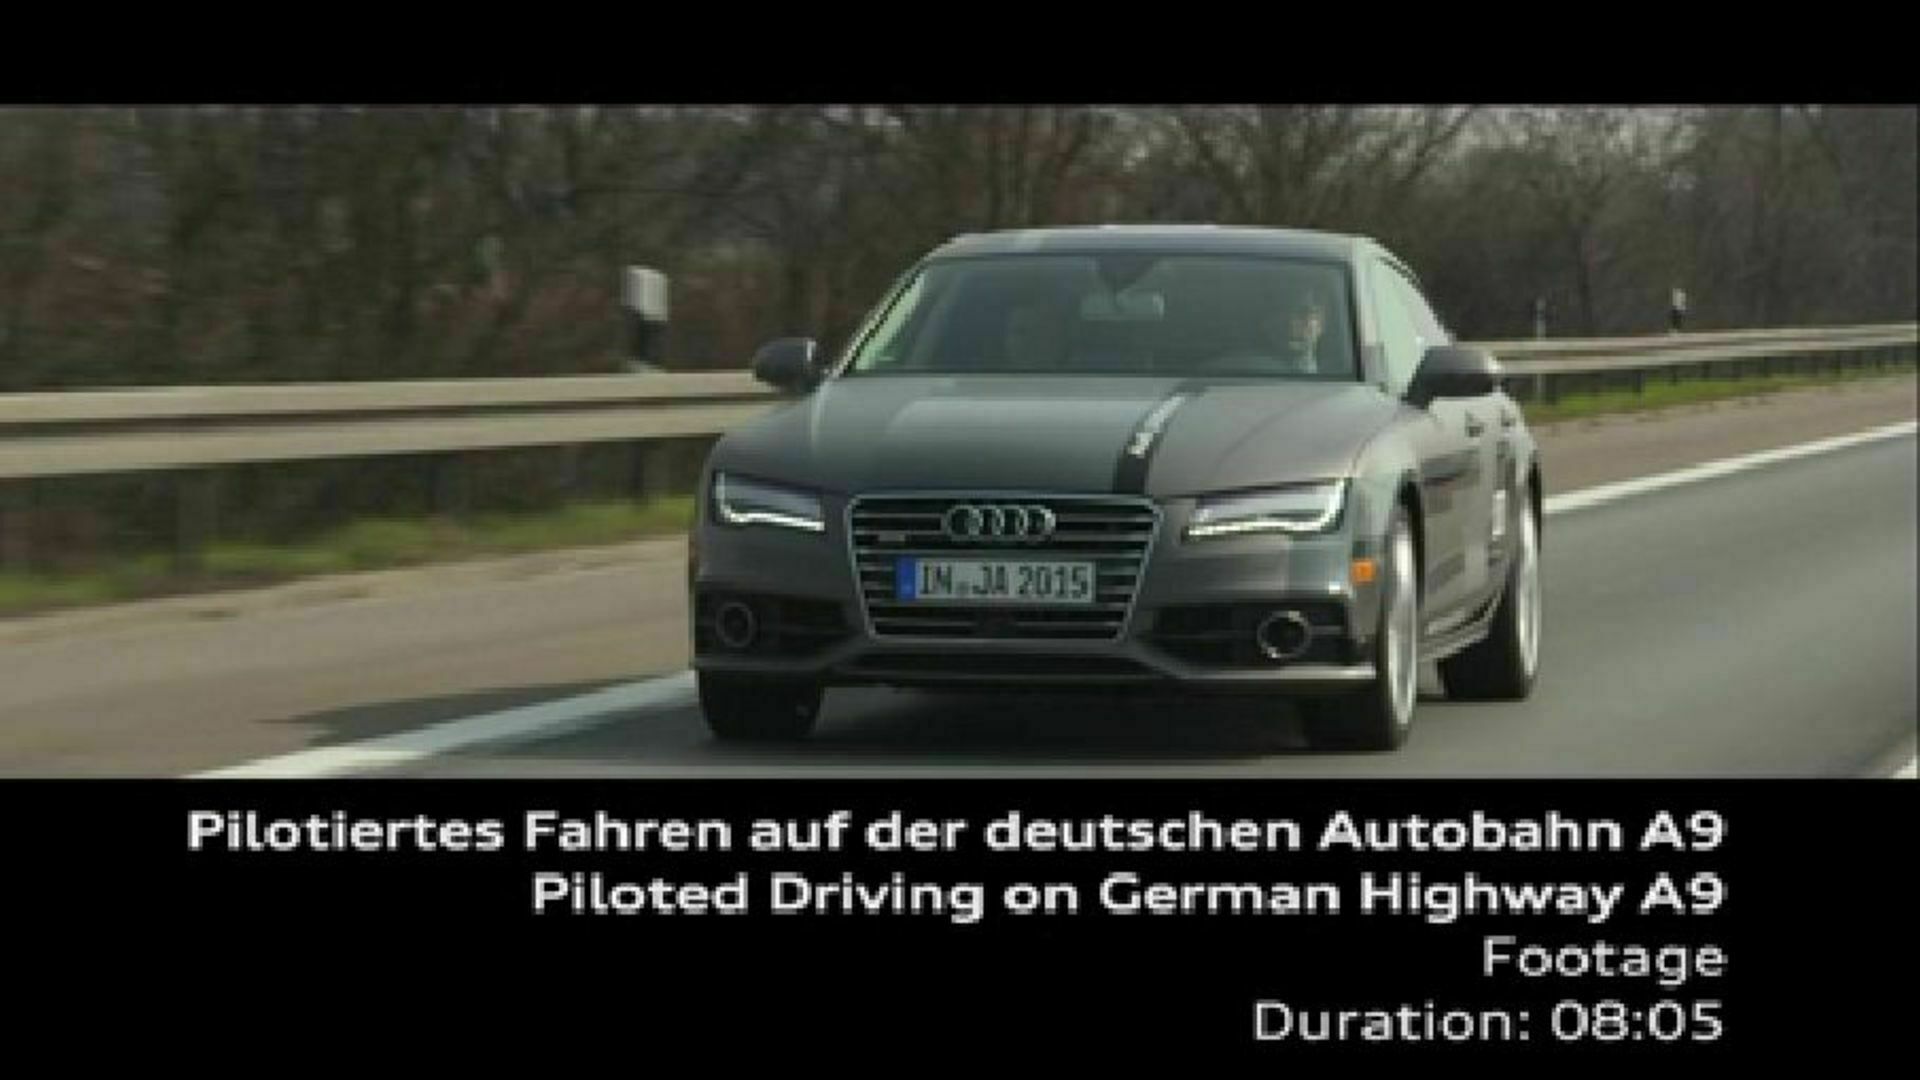 Test drive under realistic conditions on Autobahn A9 - Footage